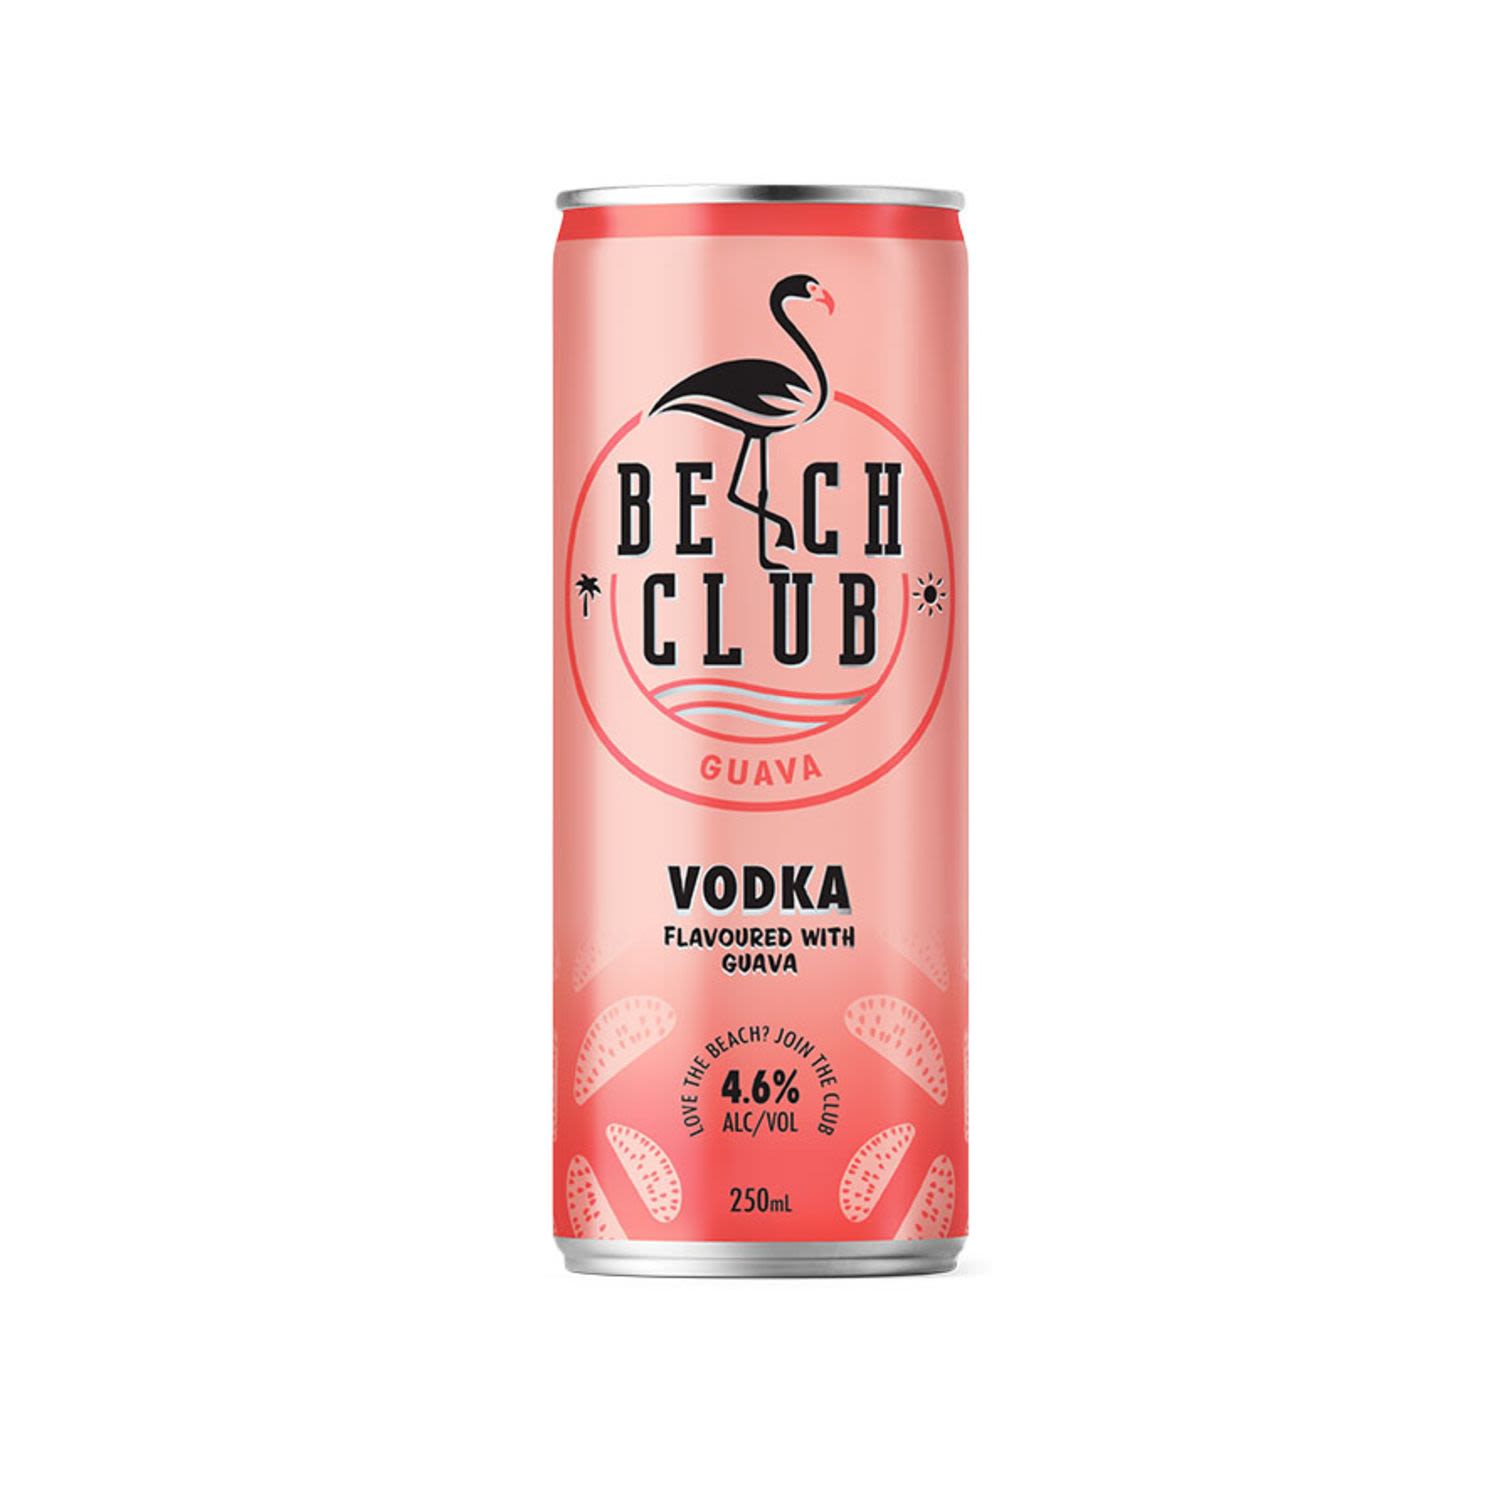 Beach Club mixes premium vodka and the fruit flavours you love to deliver thirst-quenching refreshment perfect for any social gathering. With a range of flavours including lemon lime,  passion fruit, raspberry and guava, you’ll find your perfect match with a splash of summer fun all year long.<br /> <br />Alcohol Volume: 4.6%<br /><br />Pack Format: 24 Pack<br /><br />Standard Drinks: 0.9<br /><br />Pack Type: Can<br />